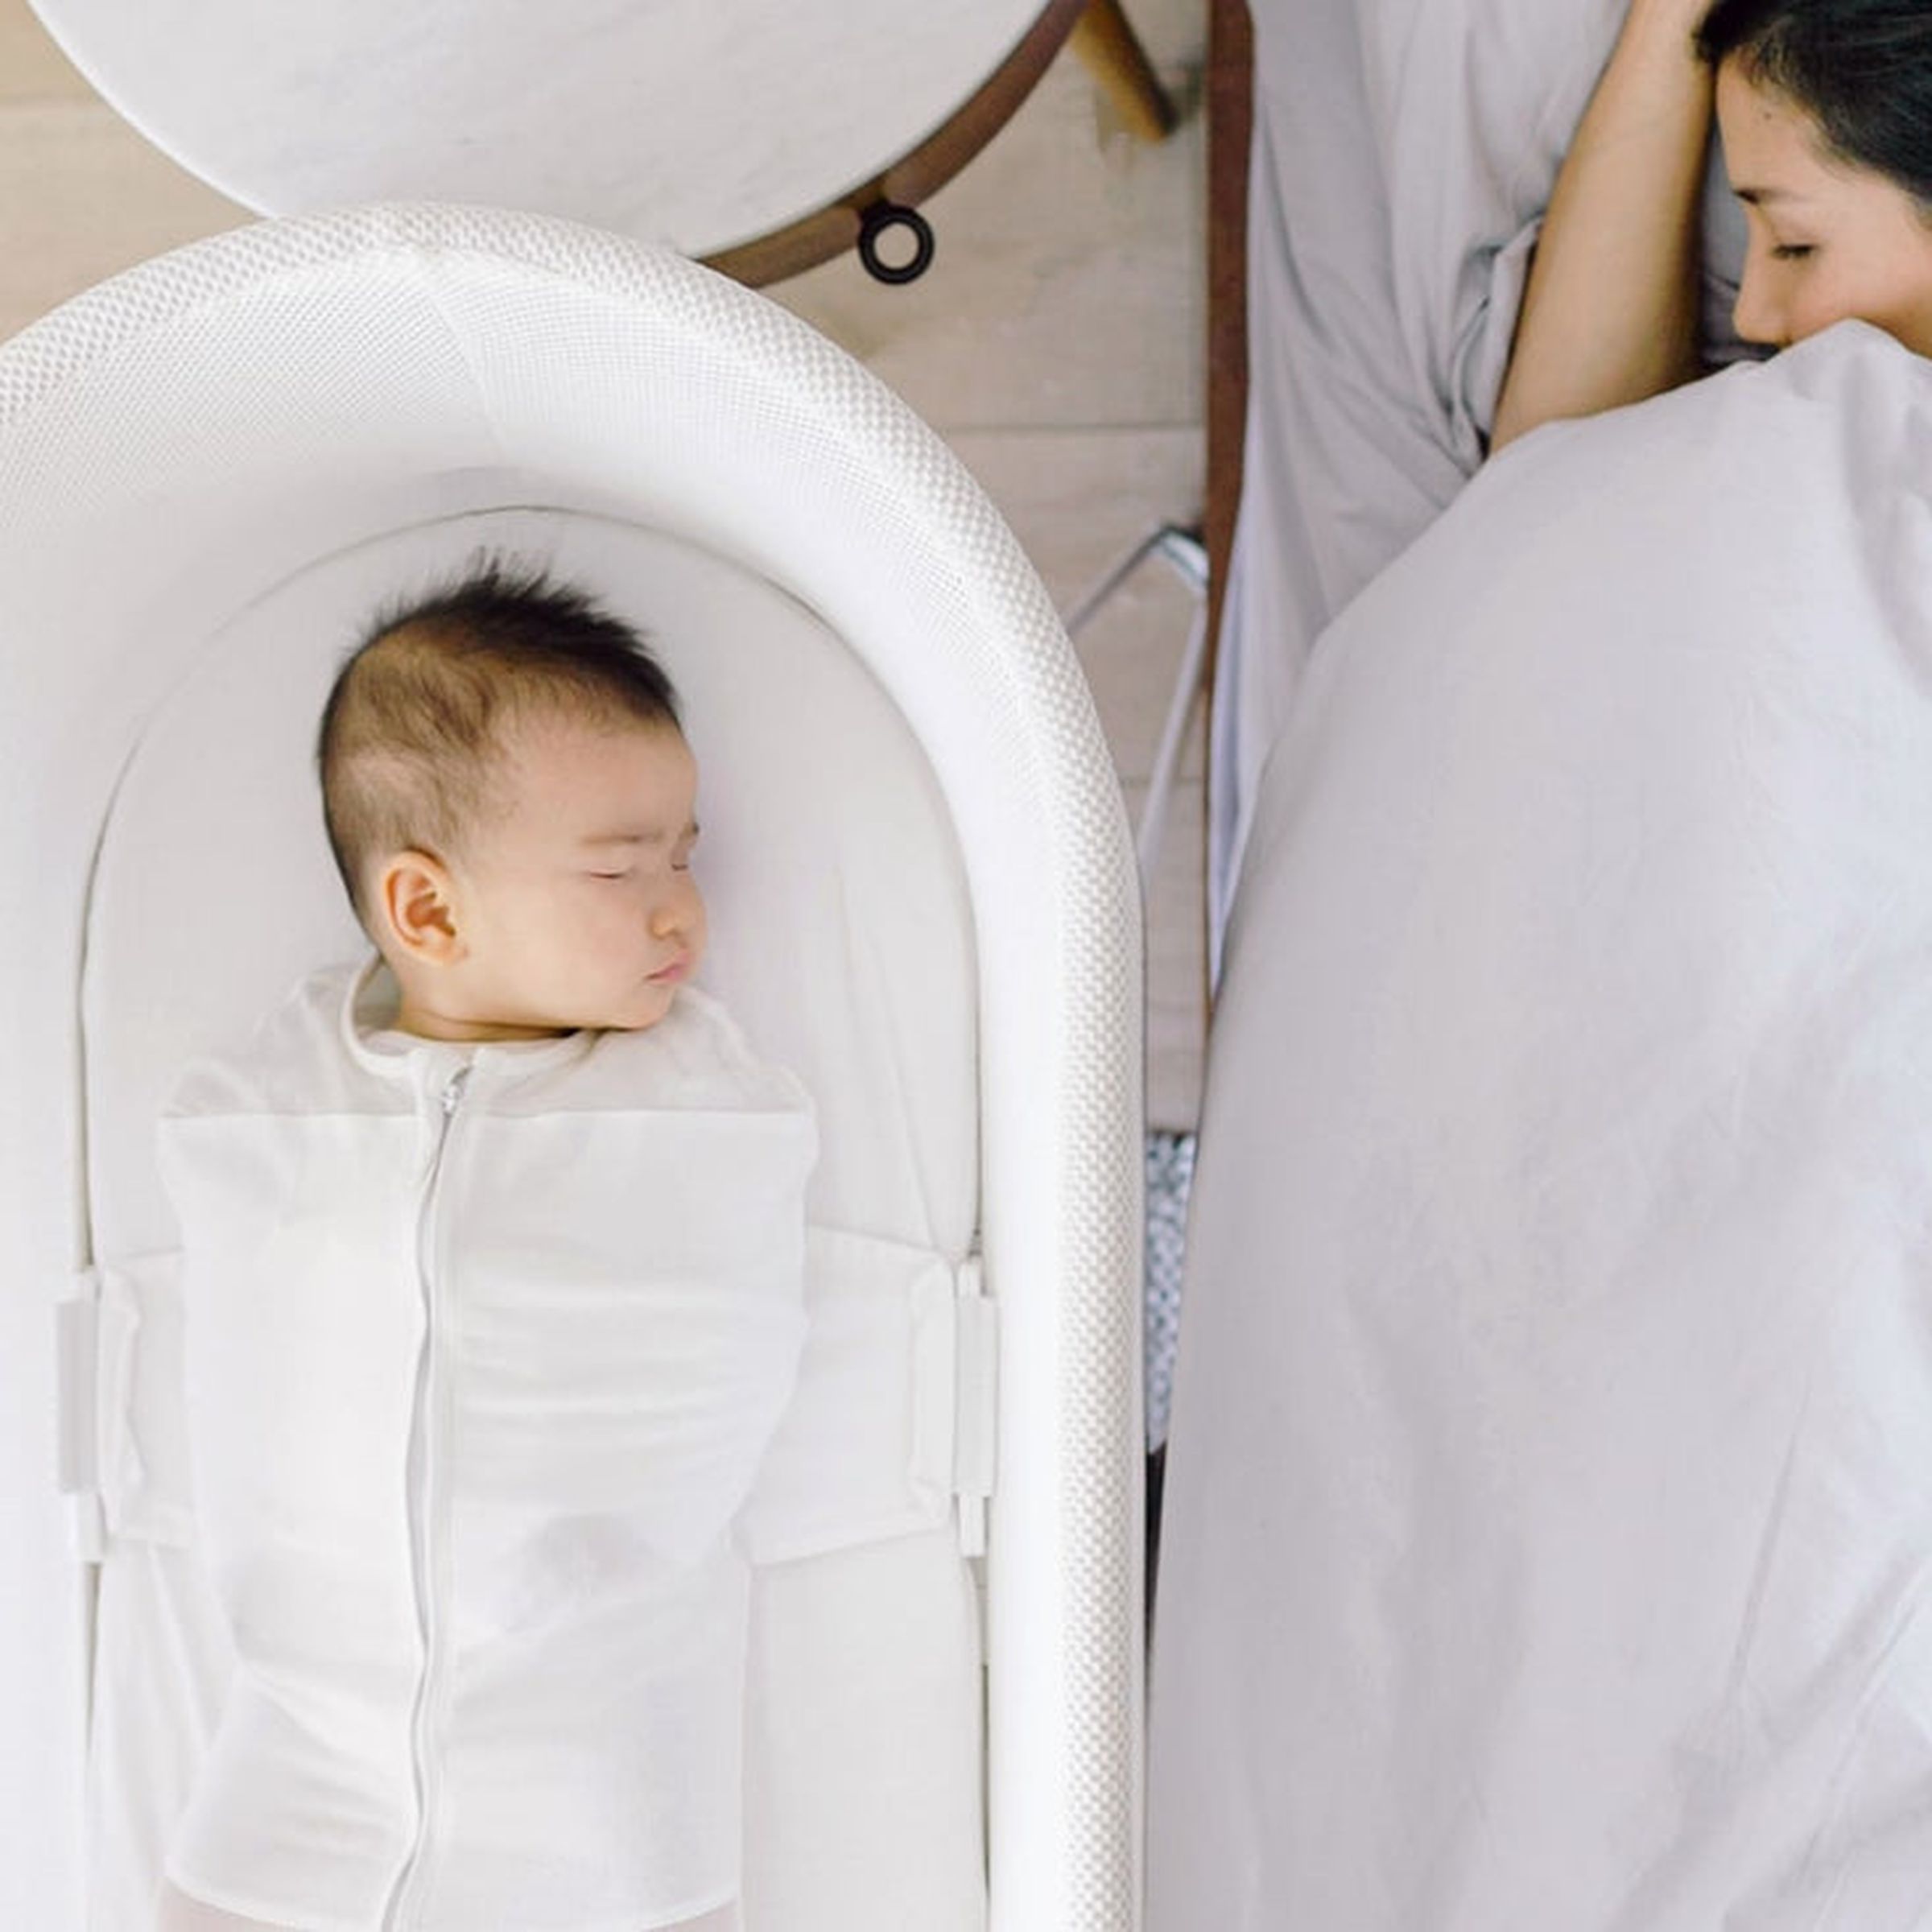 A photo of a baby sleeping a Snoo bassinet next to a person in a bed.